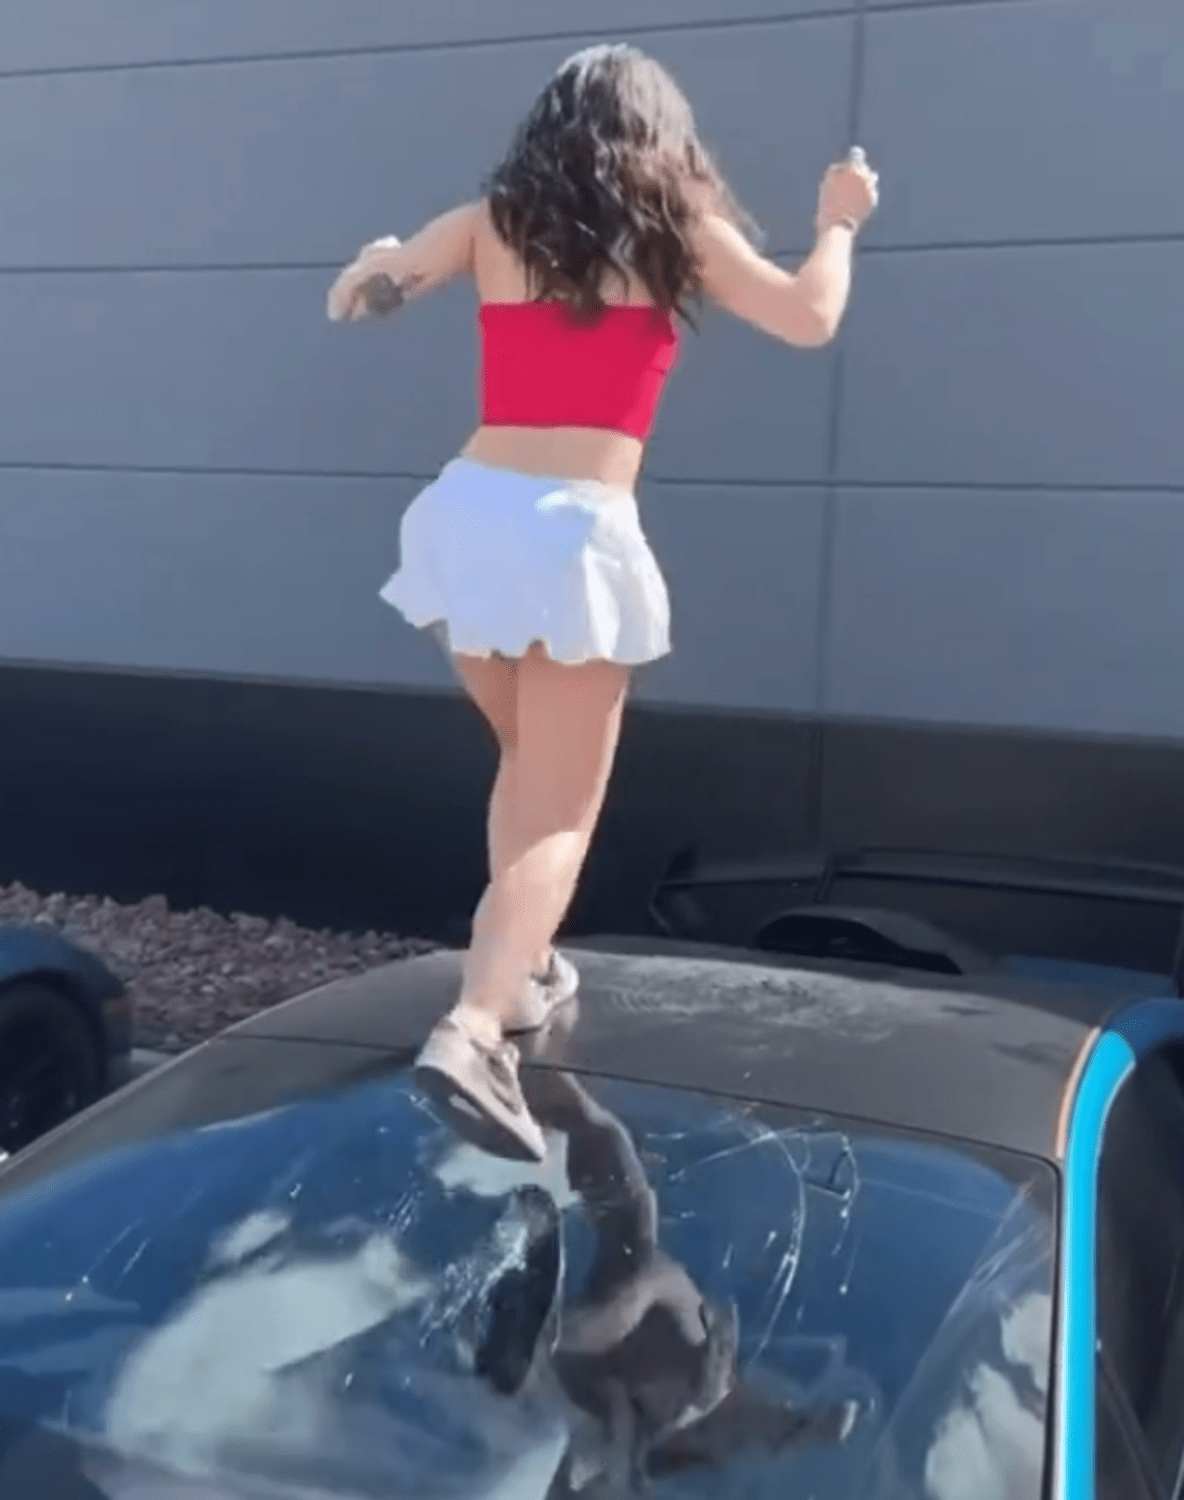 Woman Breaks Lamborghini Window While Dancing For TikTok, Surprising Viewers With Car's Fragility